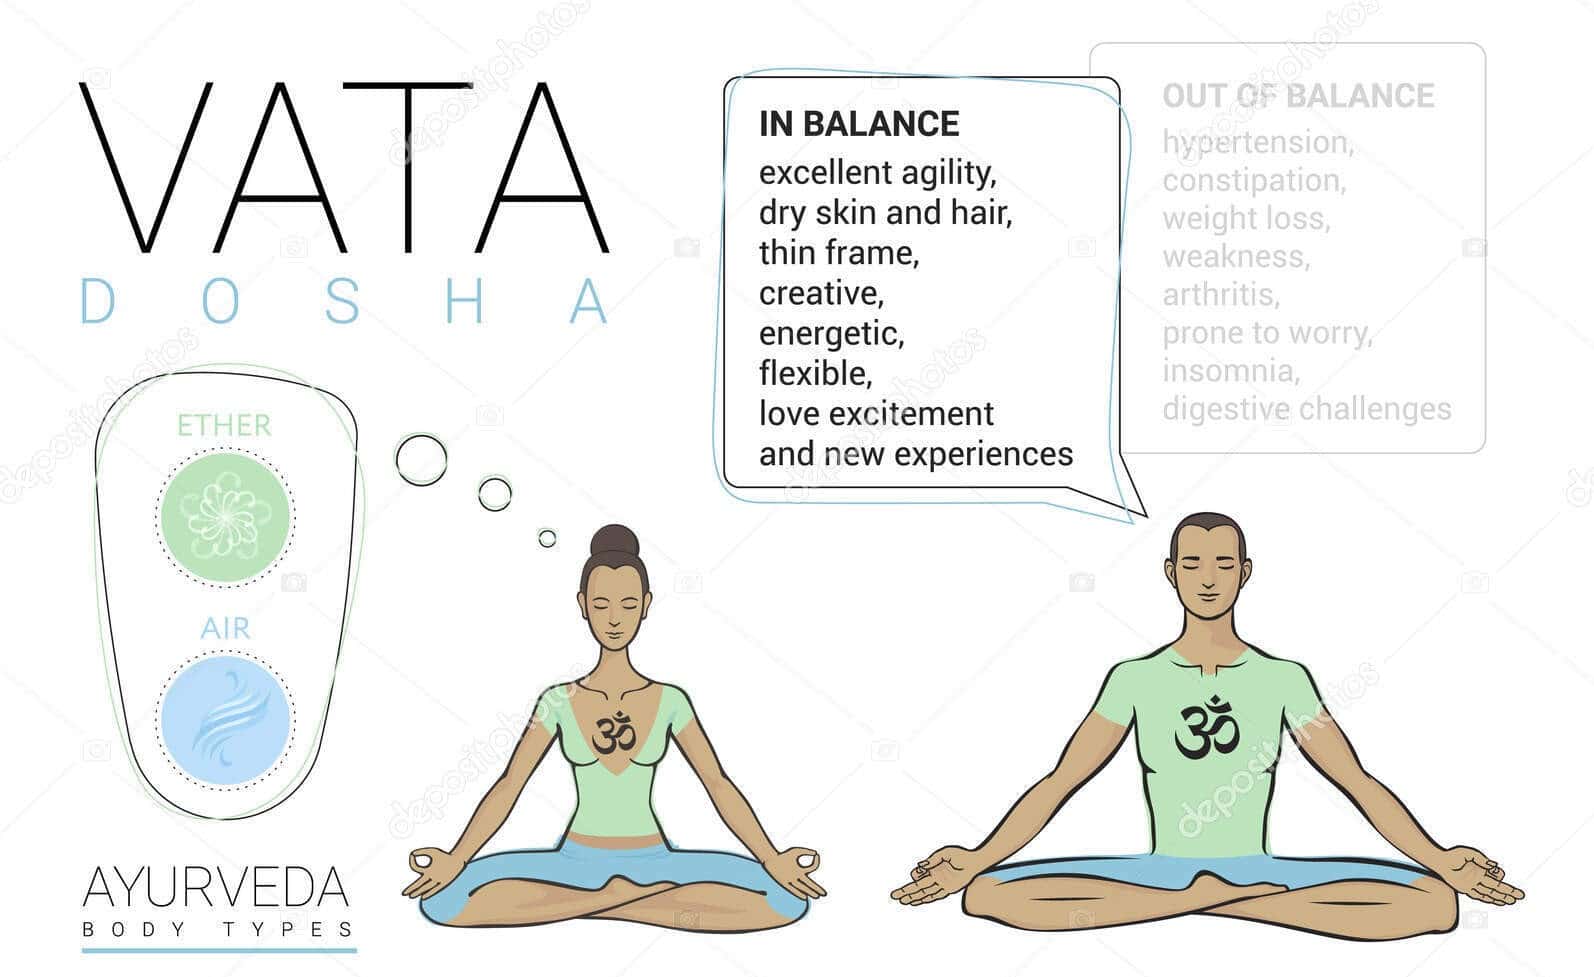 Watch: 12 Minute Calming Yoga Sequence For Vata Dosha, With Meditation